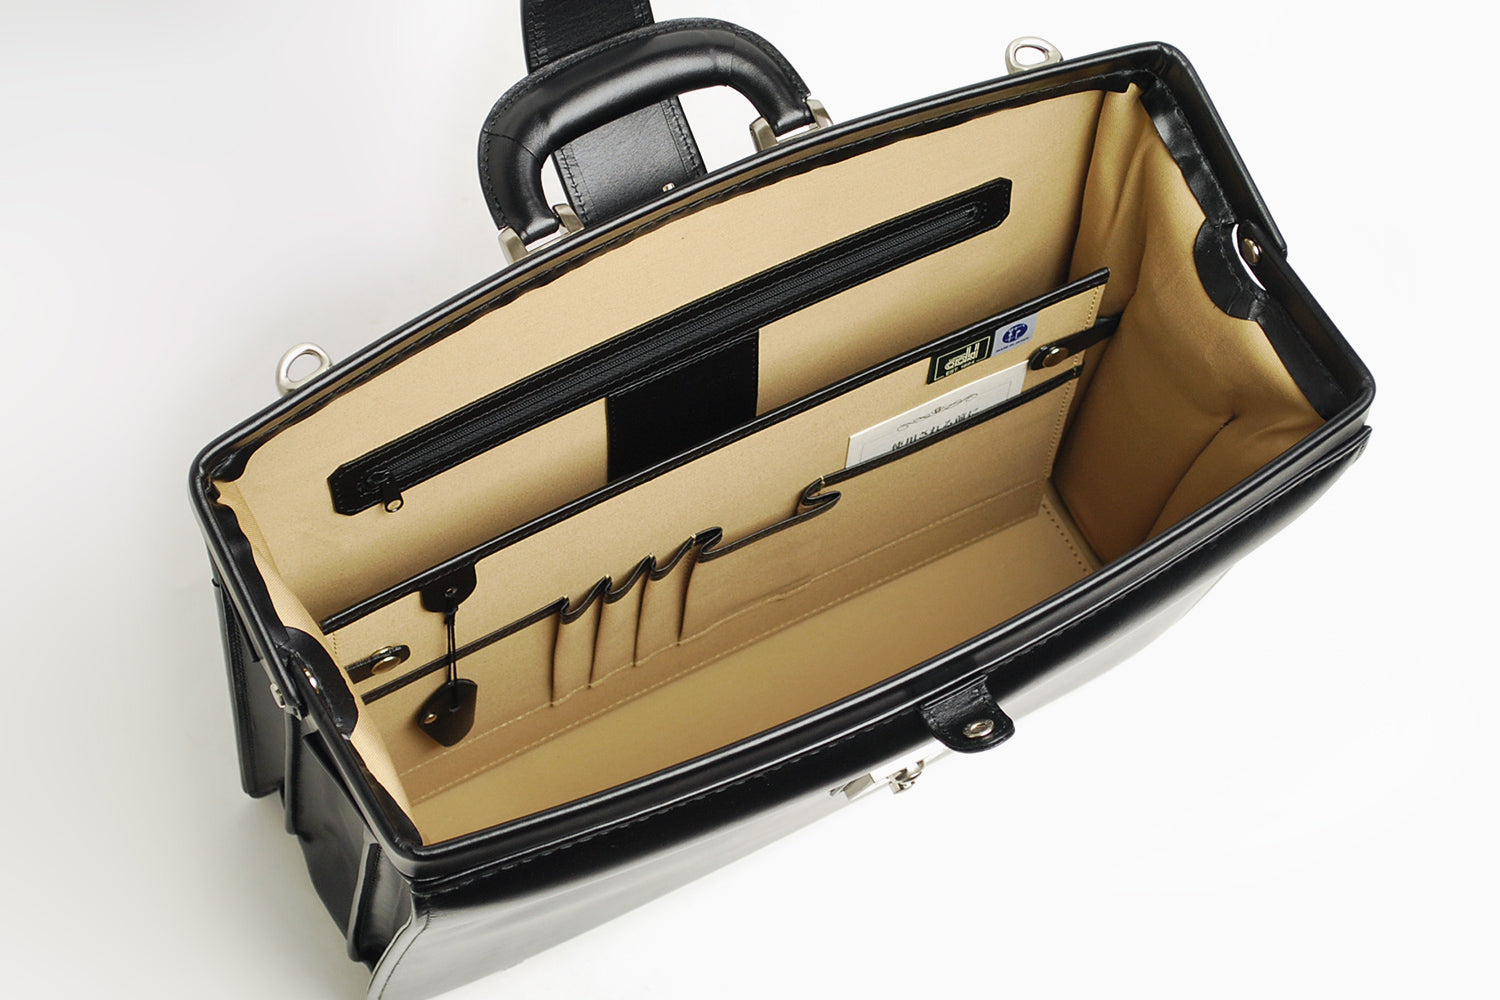 Luggage AOKI 1894 / Genius A crystal of Japanese craftsmanship. An elegant Dulles bag made of heavy leather leather